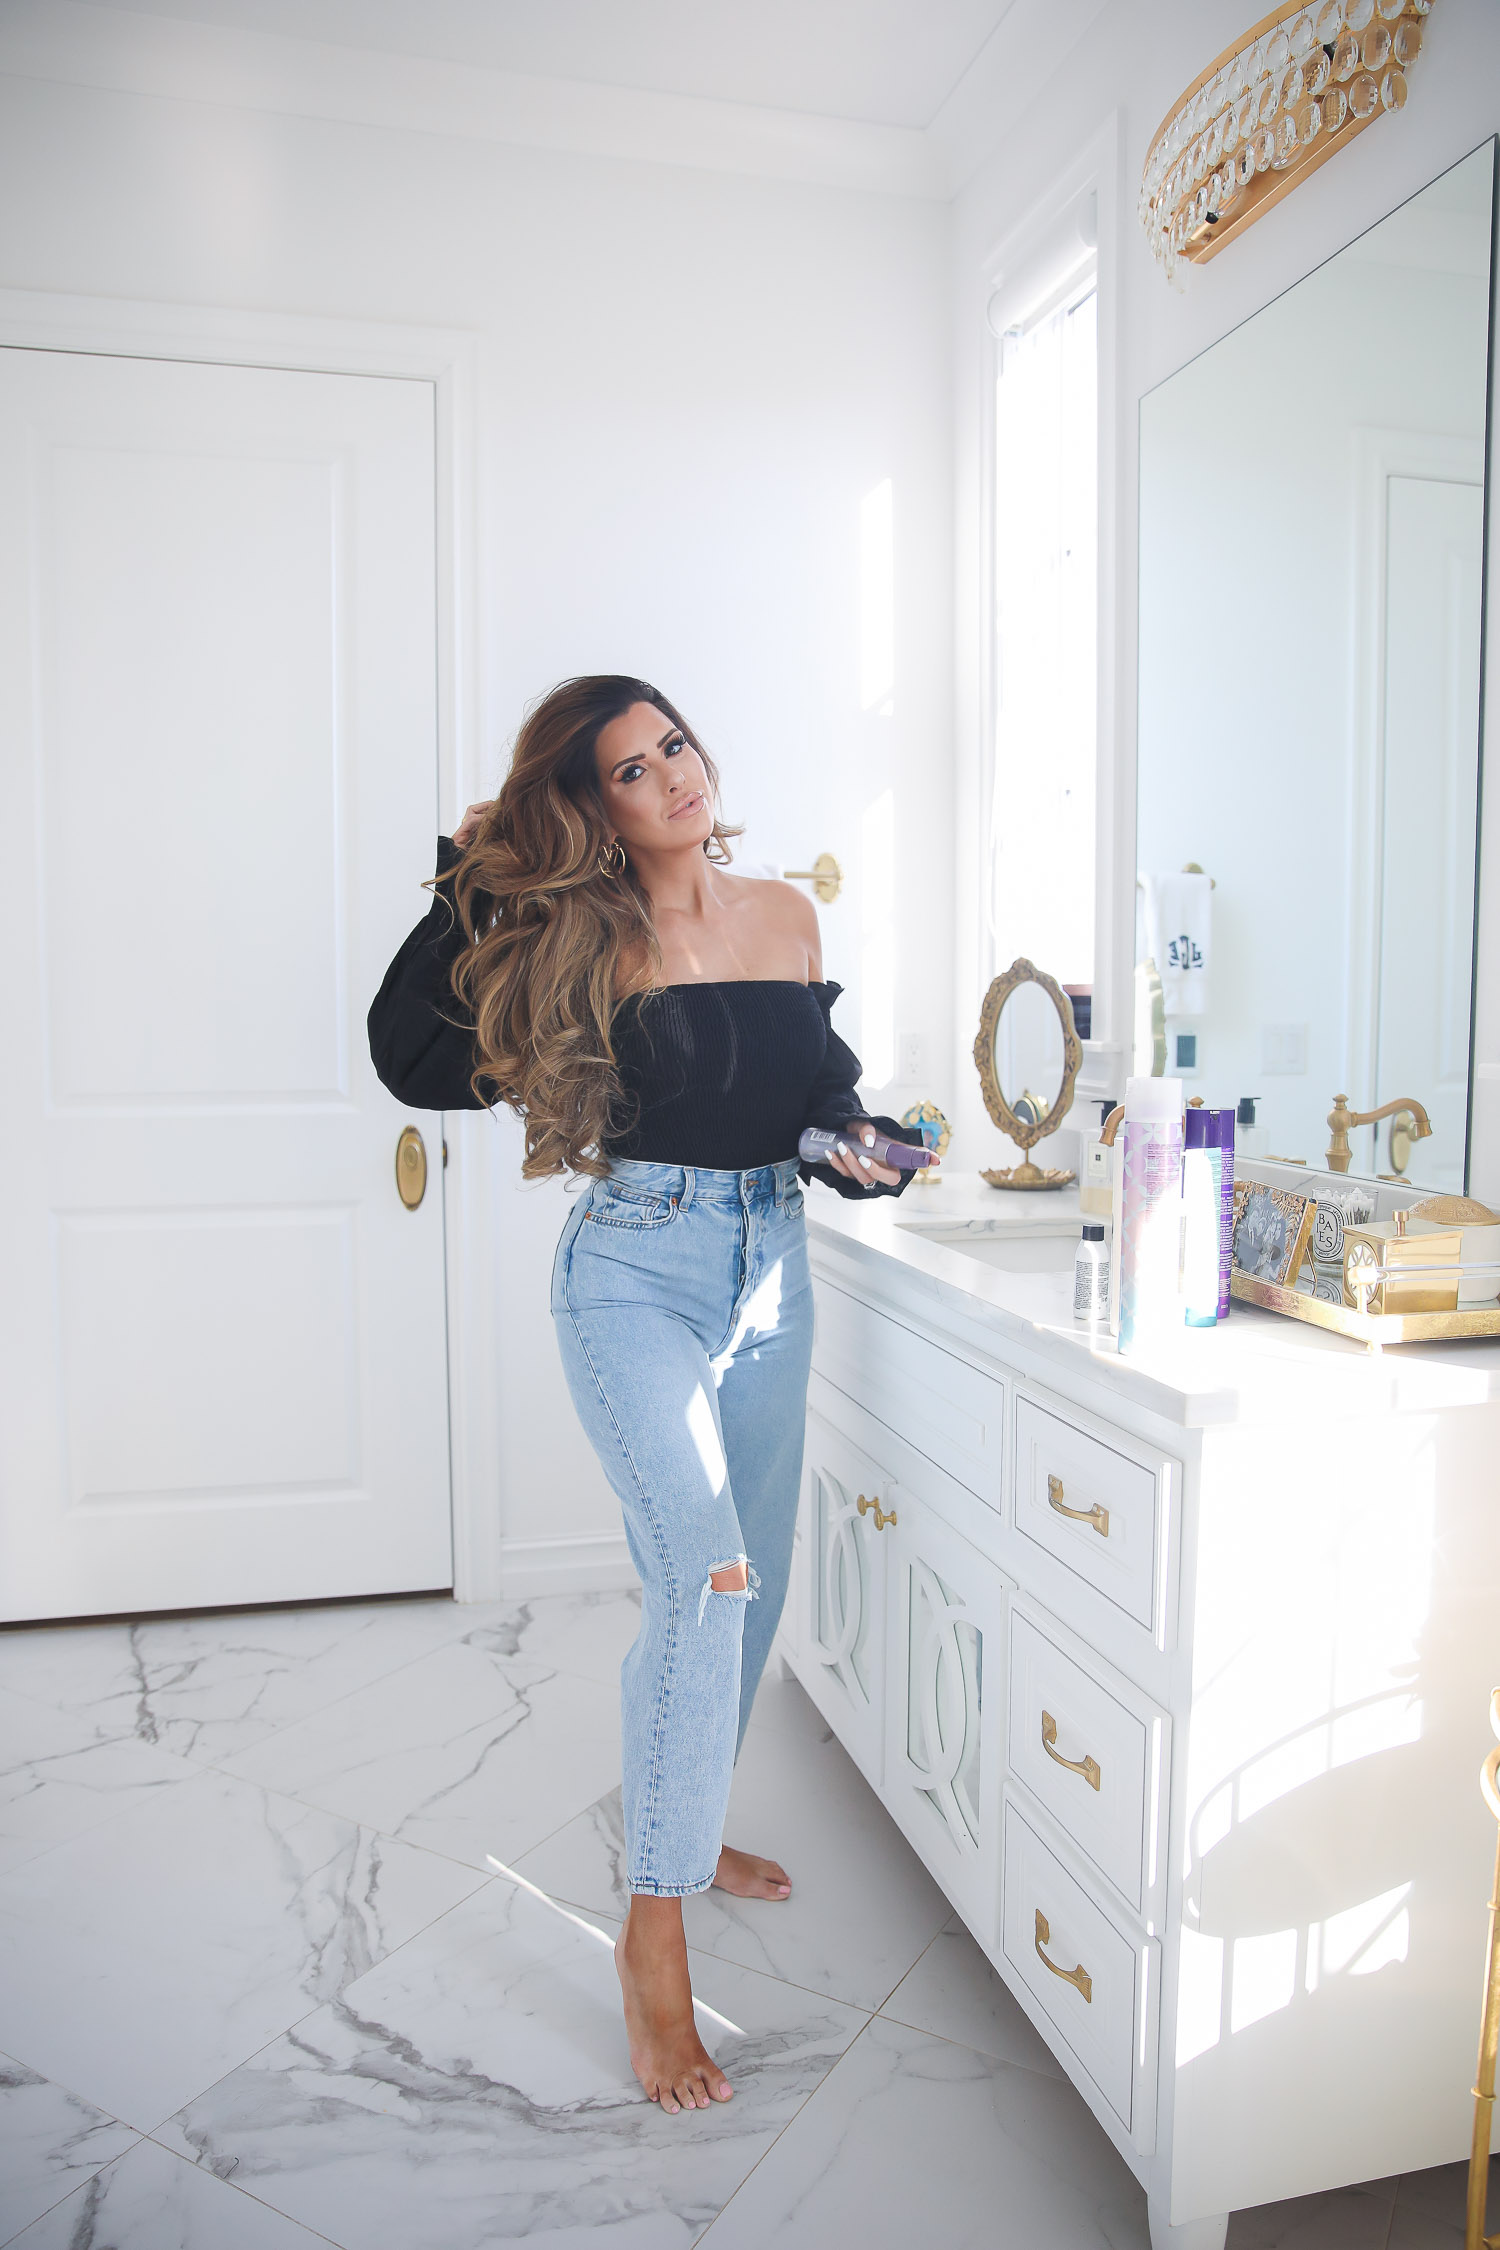 hair dot com, best hair products for long hair and extensions, Purology shampoo and conditioner, emily gemma, the sweetest thing blog | Hair Products by popular US beauty blog, The Sweetest Thing: image of Emily Gemma standing in her bathroom and wearing a black off the shoulder top, high waisted light denim jeans, and holding a bottle of Pureology hair product in her hand. 